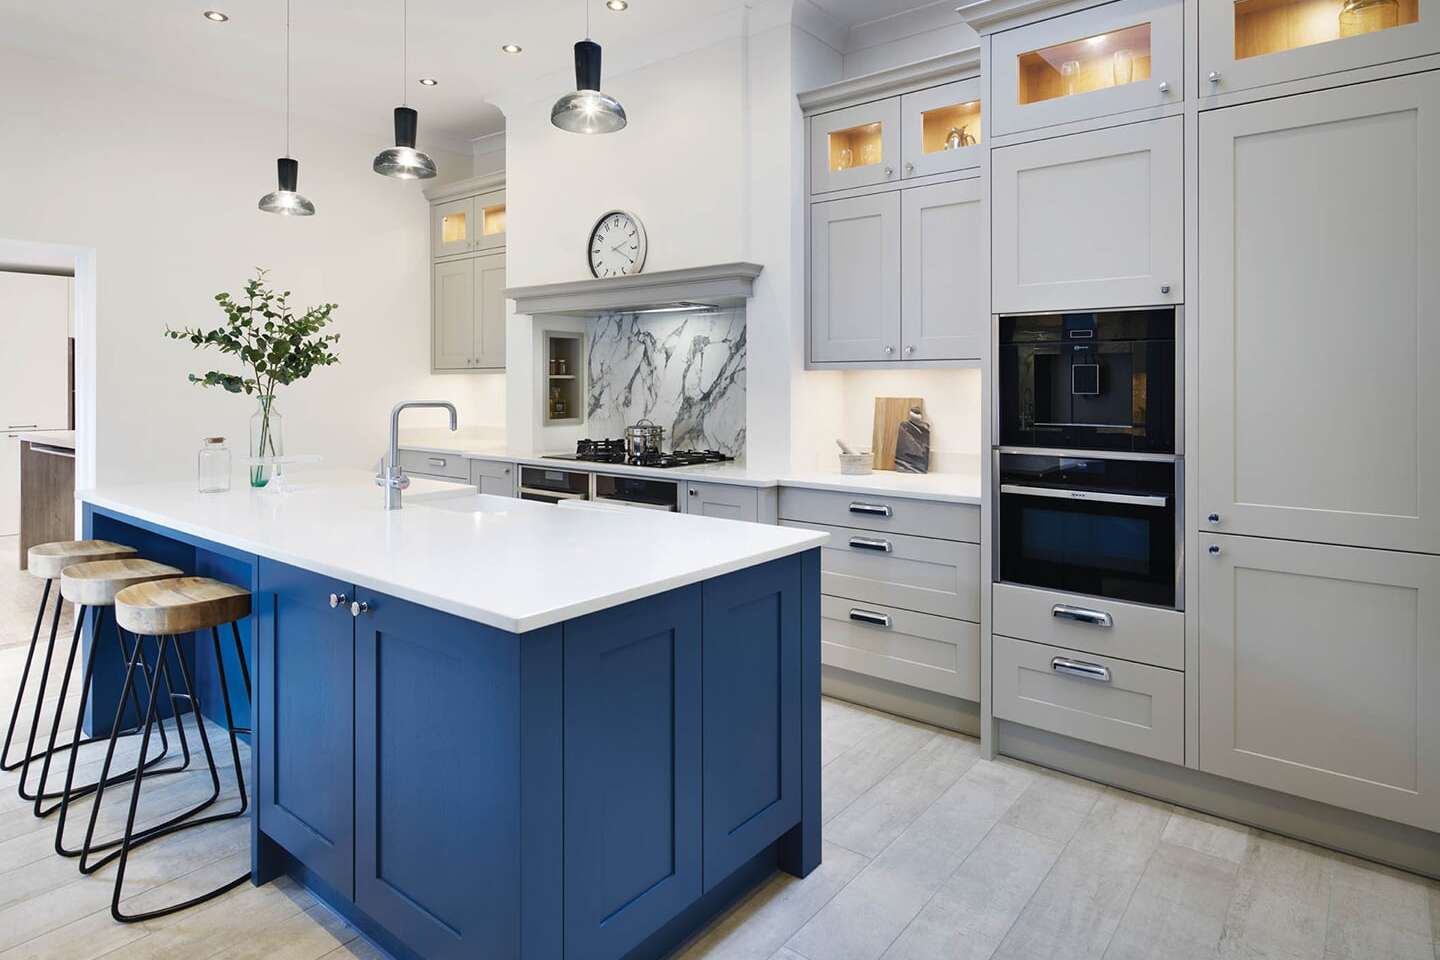 Light grey floor-to-ceiling Callerton kitchen cupboards, paired with blue kitchen island and white marble worktops